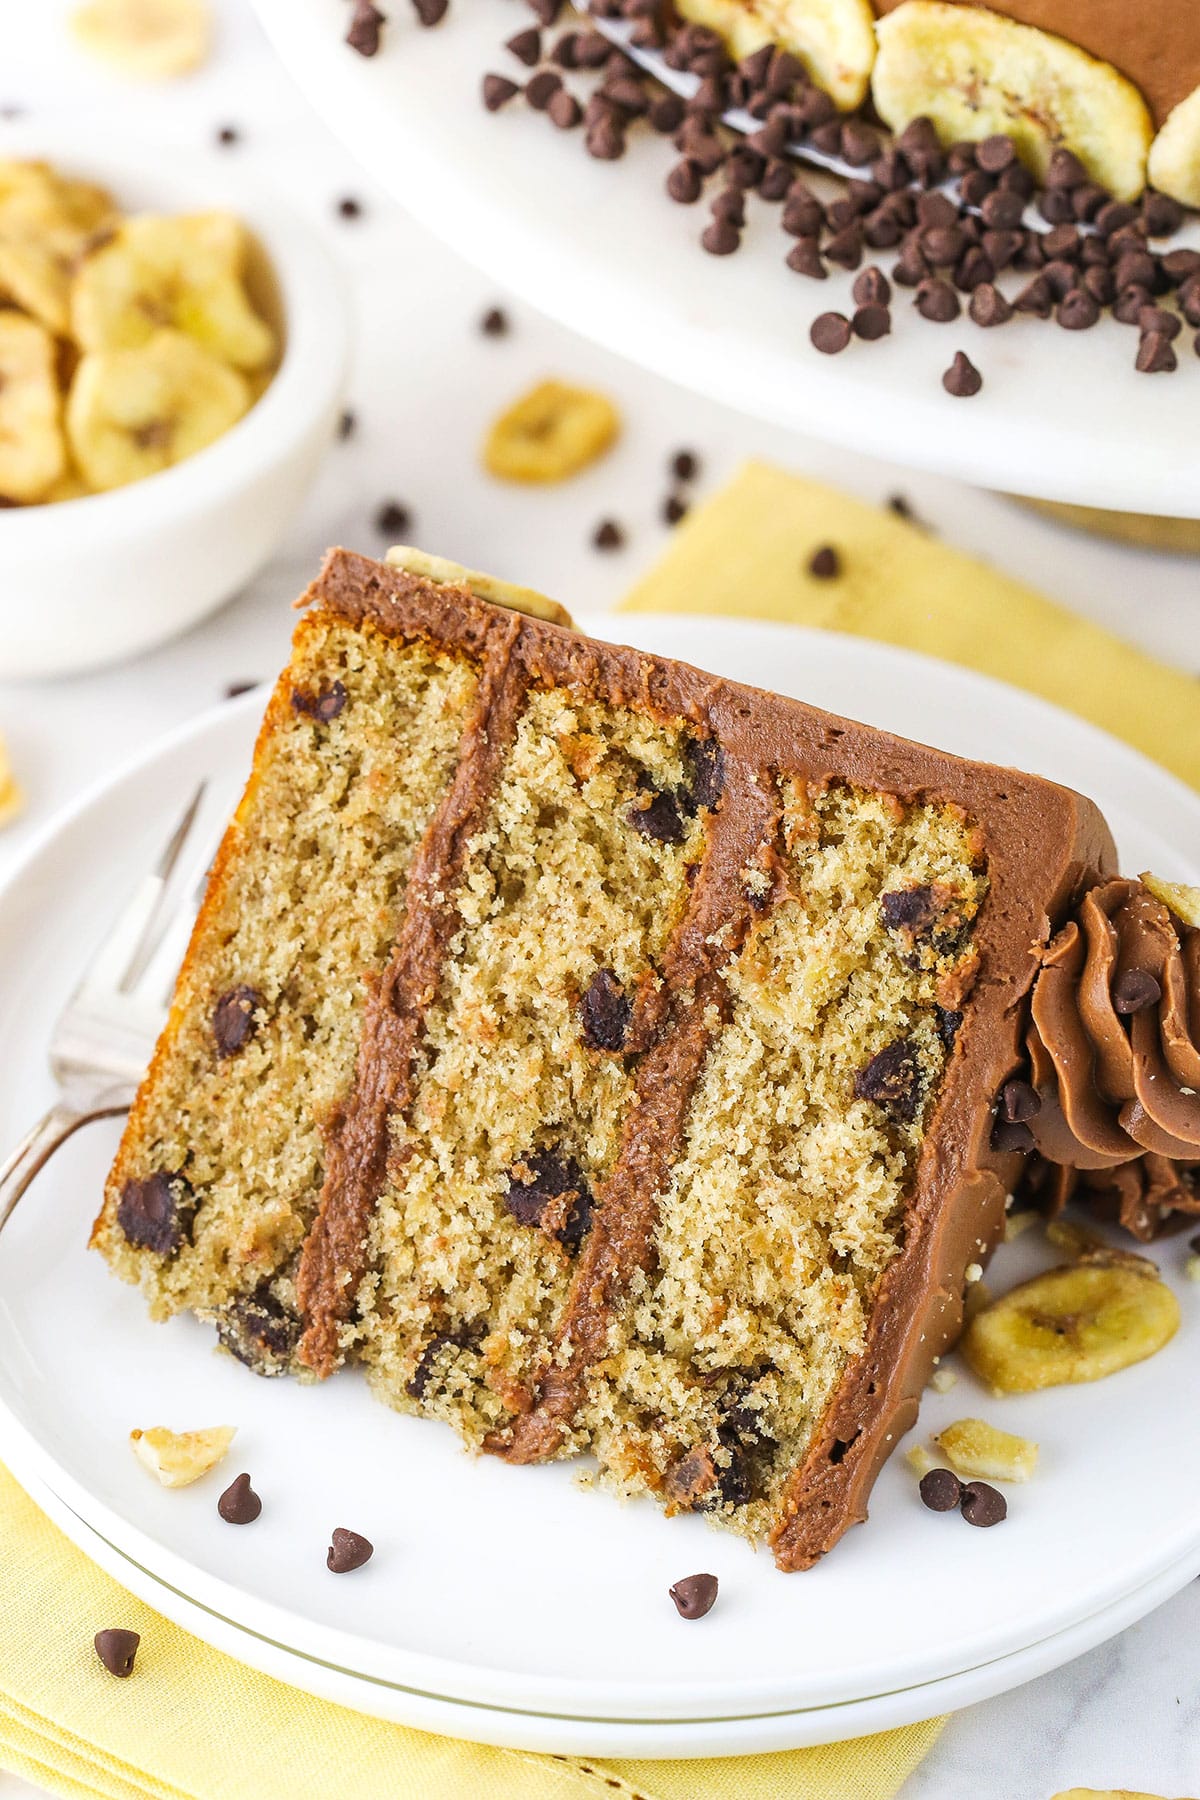 Chocolate Chip Loaf Cake (Recipe + Video) - Sally's Baking Addiction